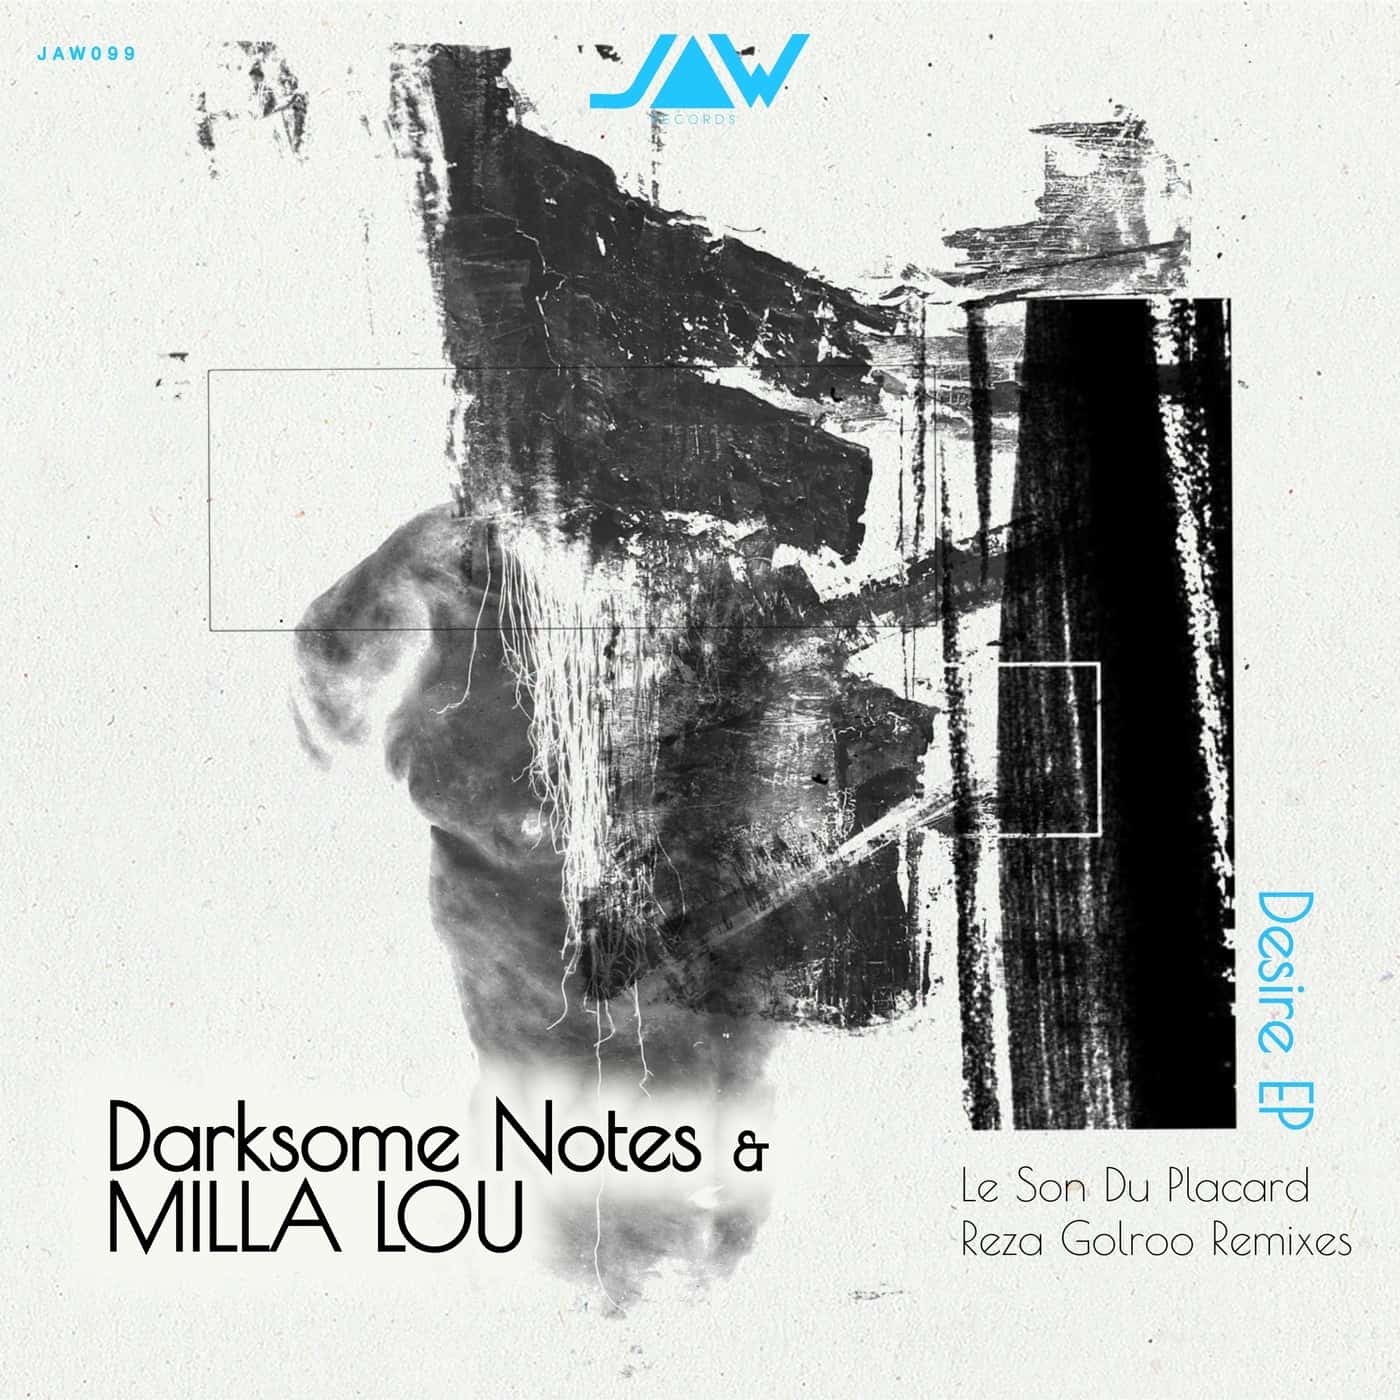 image cover: Darksome Notes, MILLA LOU - Desire / JANNOWITZ099